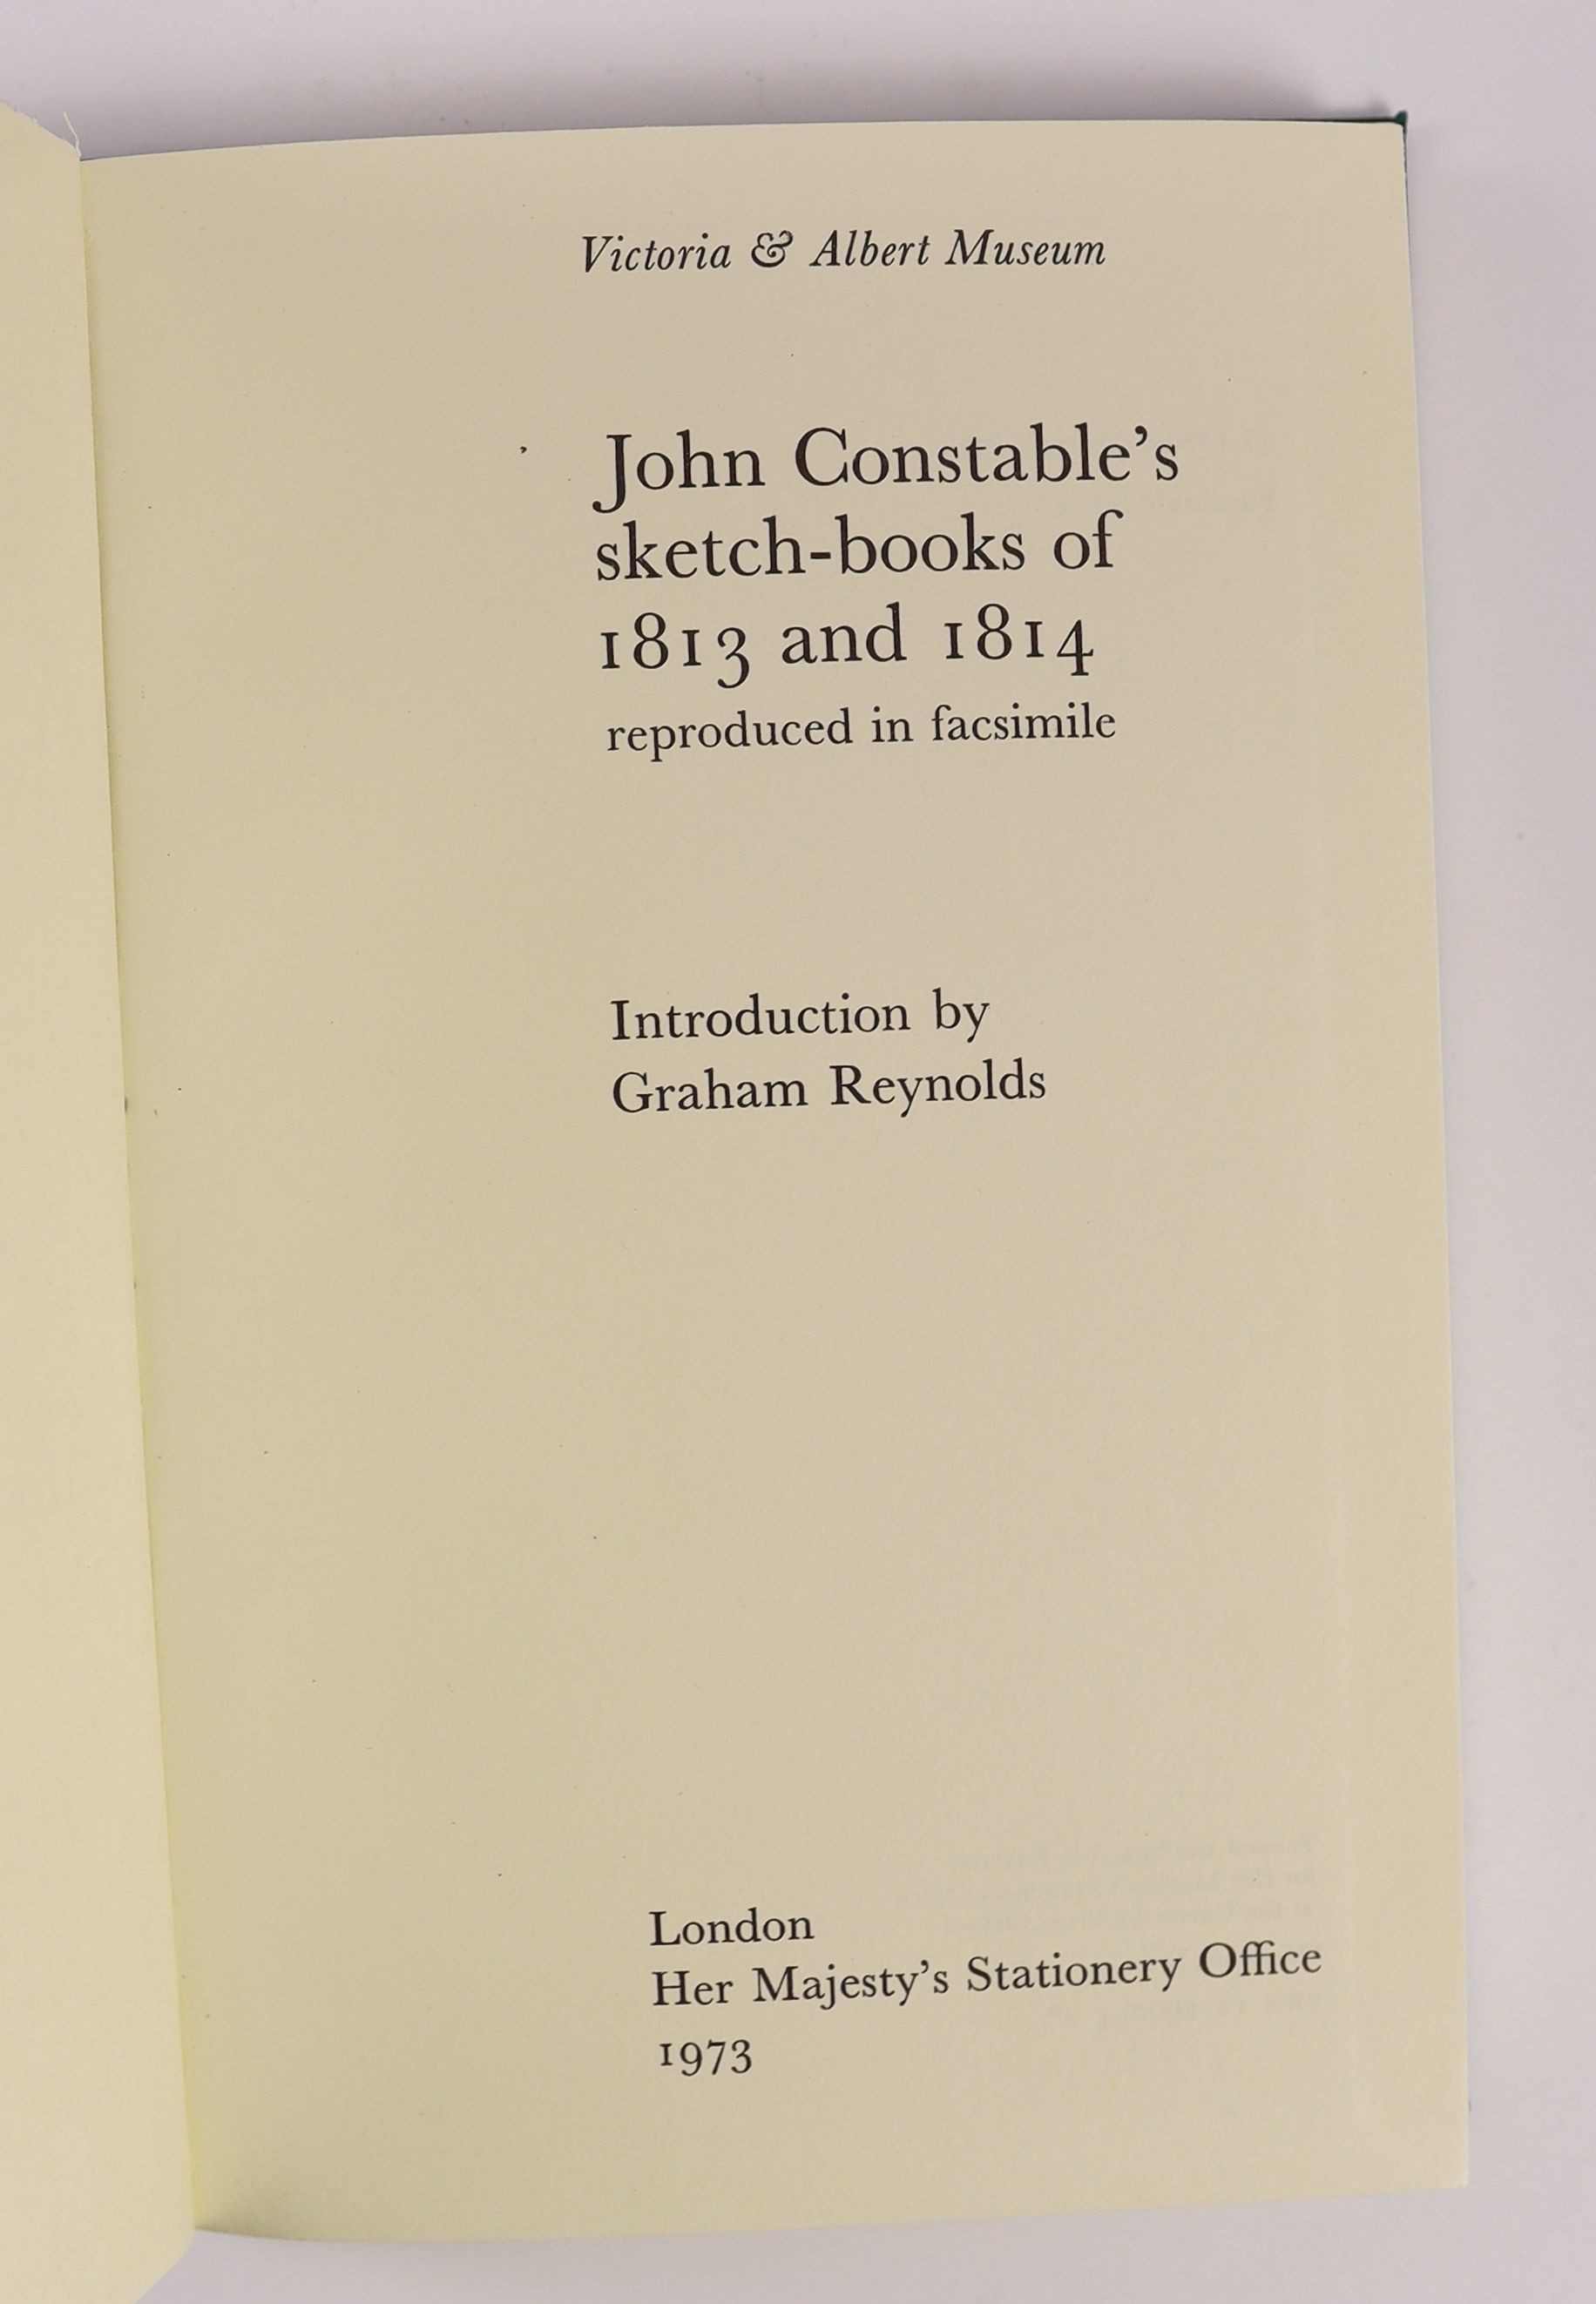 Mid 20th century works. Reynolds, Graham - John Contable’s Sletch-Books of 1813-1814 Reproduced in Facsimile. Facsimile no.2. 3 vols. Adorned with numerous plates and illustrations. Publishers cloth with gilt letters on